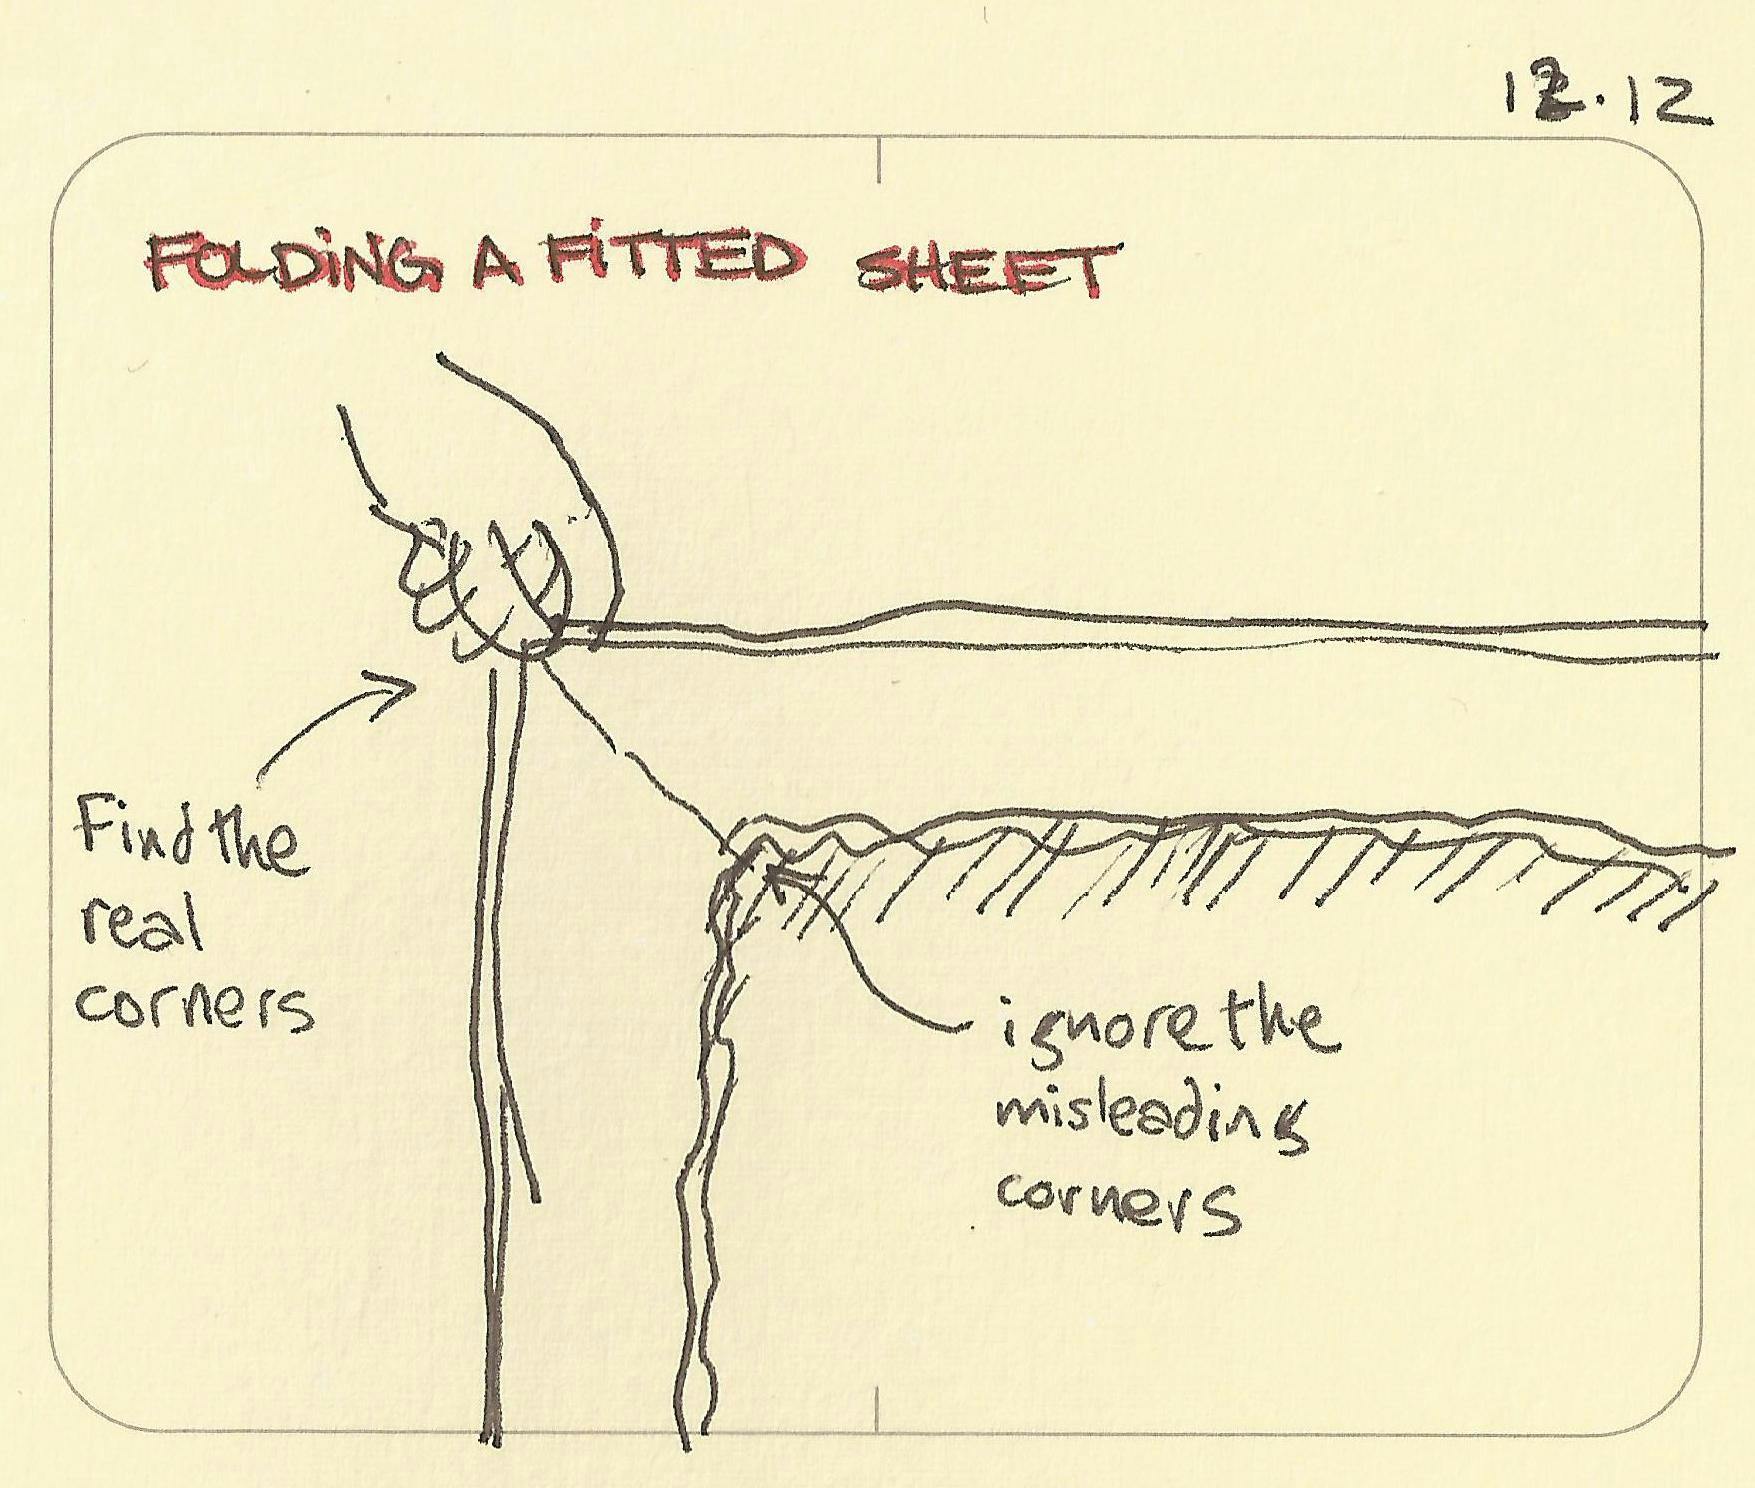 Folding a fitted sheet - Sketchplanations